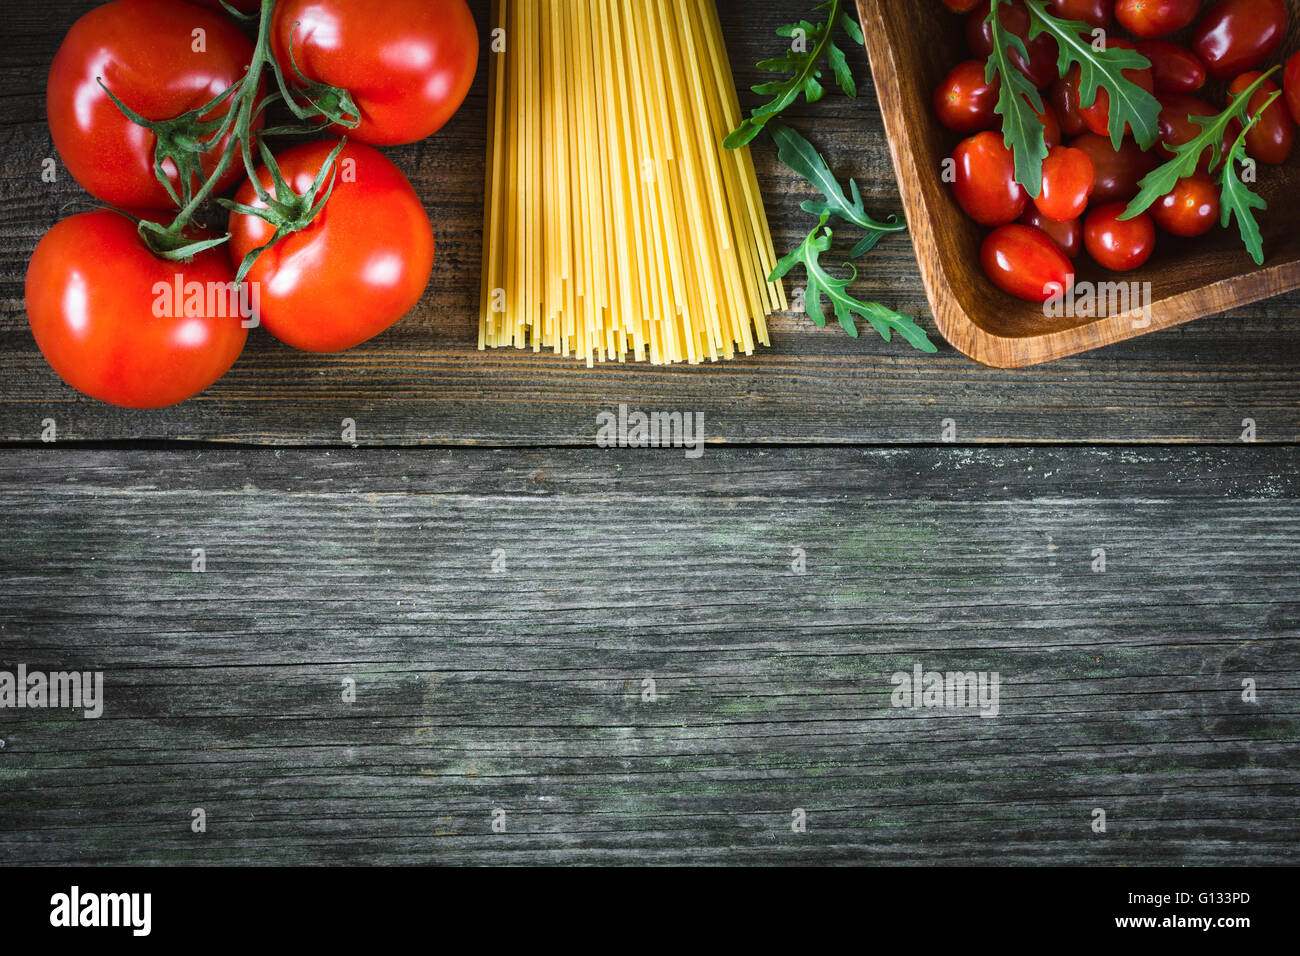 Italian food background / cooking ingredients background. Dry pasta, tomatoes, olive oil and salad leaves on wooden backdrop Stock Photo